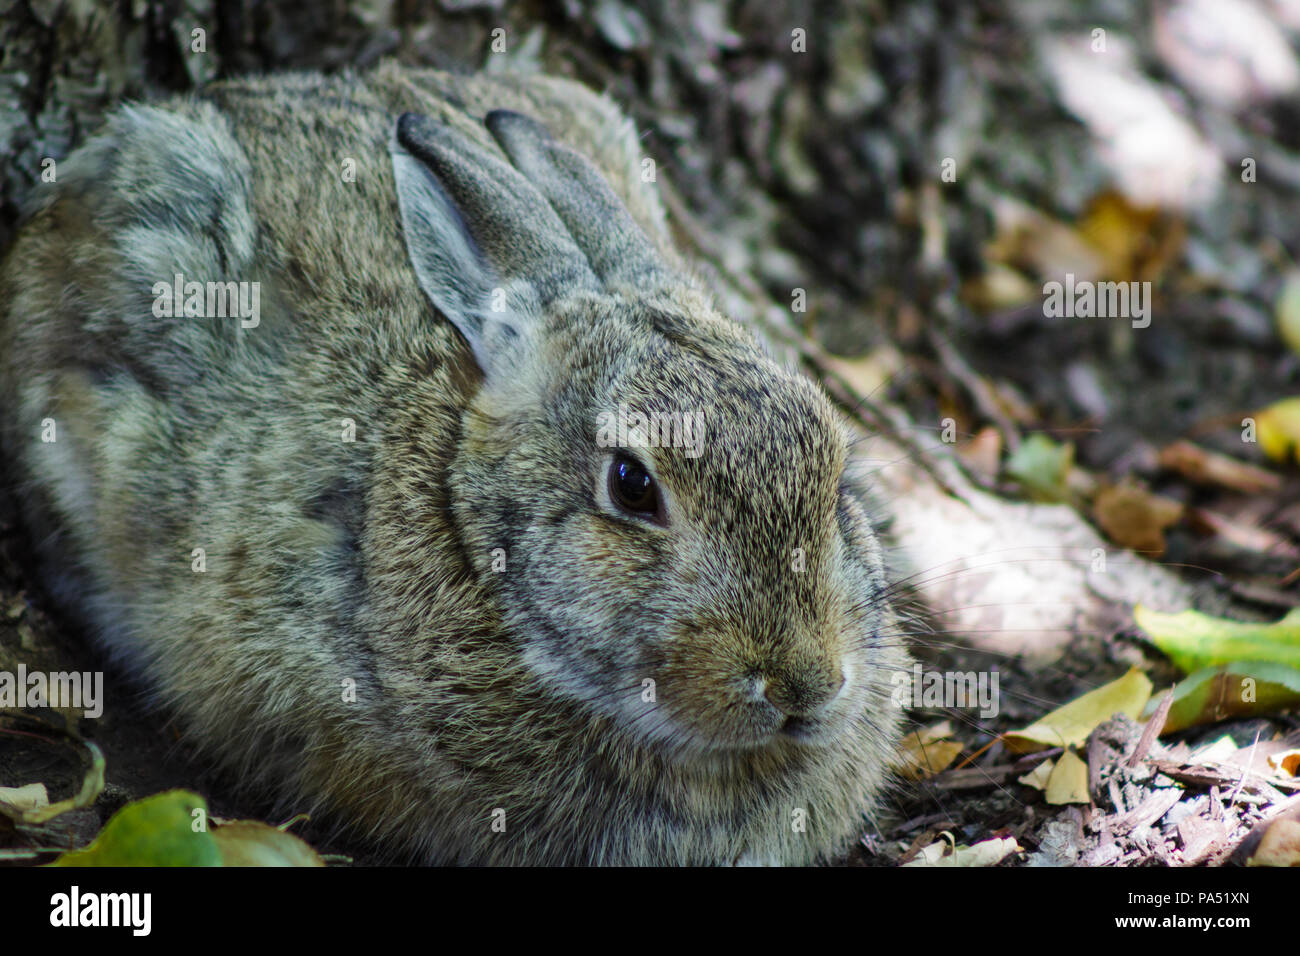 Full body portrait of a cute bunny rabbit against the base of a tree. Stock Photo